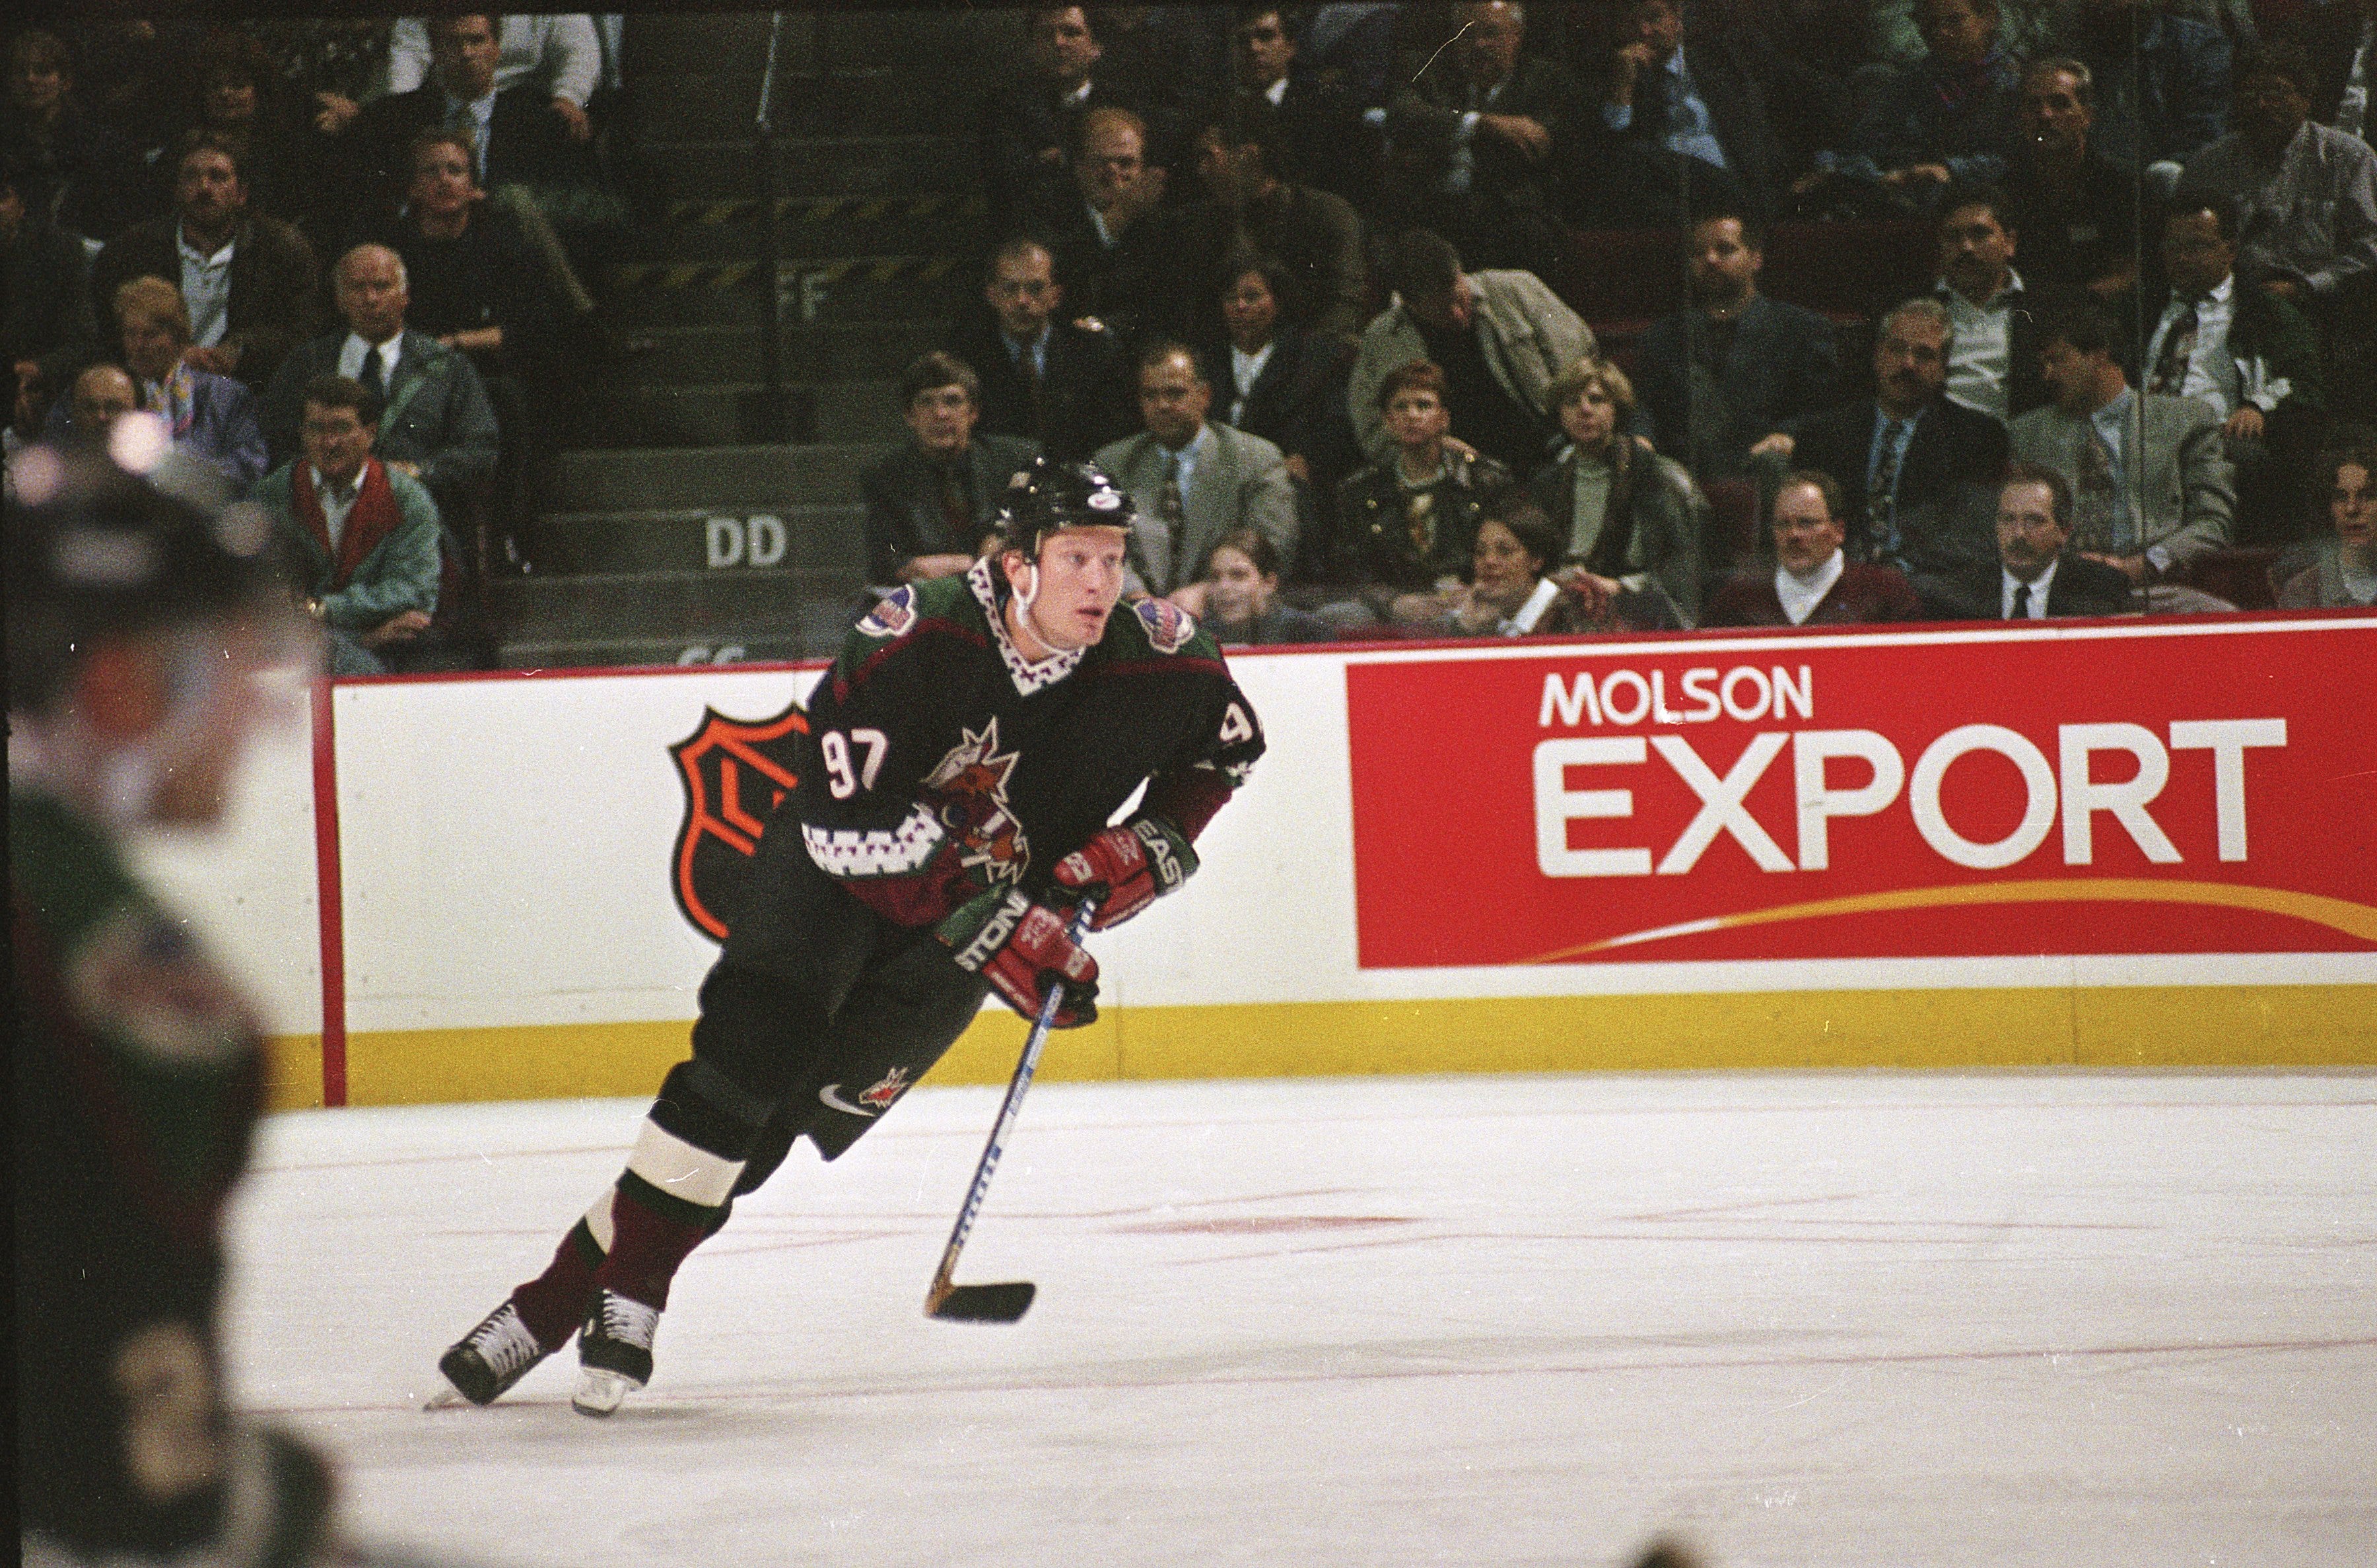 Redrafting the 1996 NHL Draft, the Arizona Coyotes' first-ever